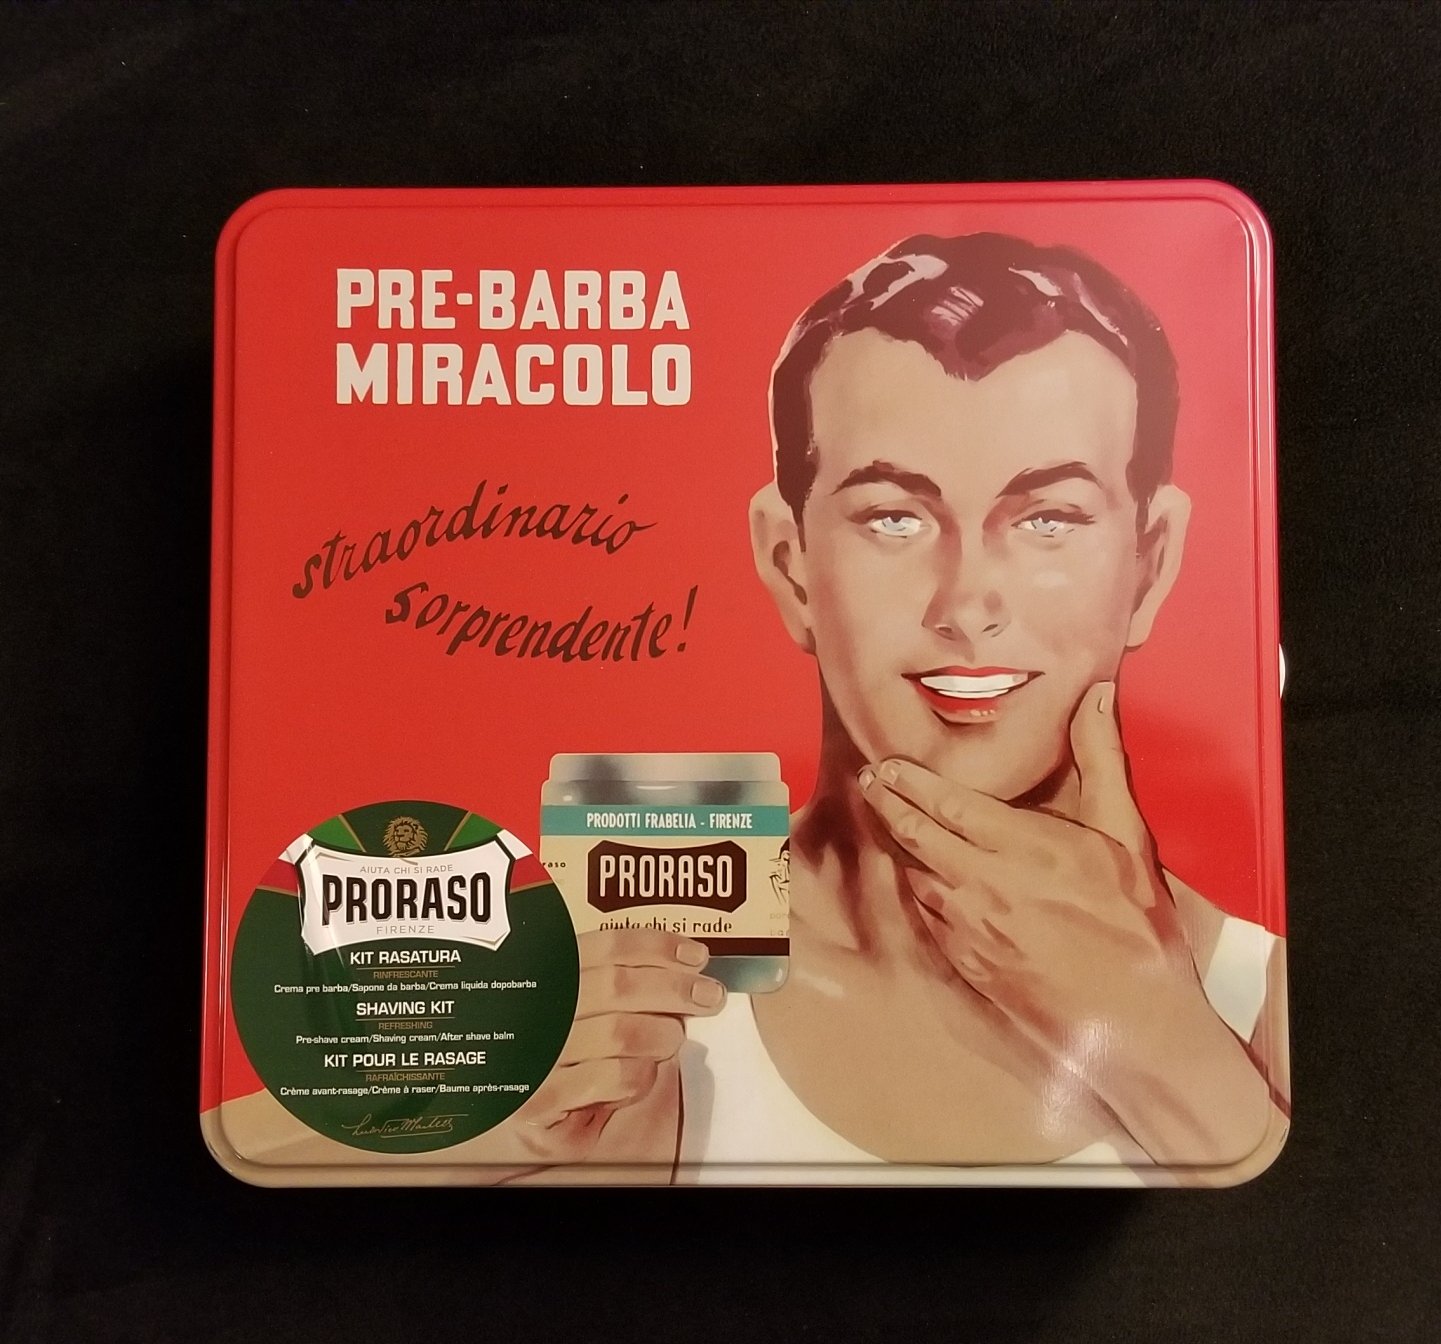 Finally tried the full 3 Proraso “Green” product suite – Fenomenale!